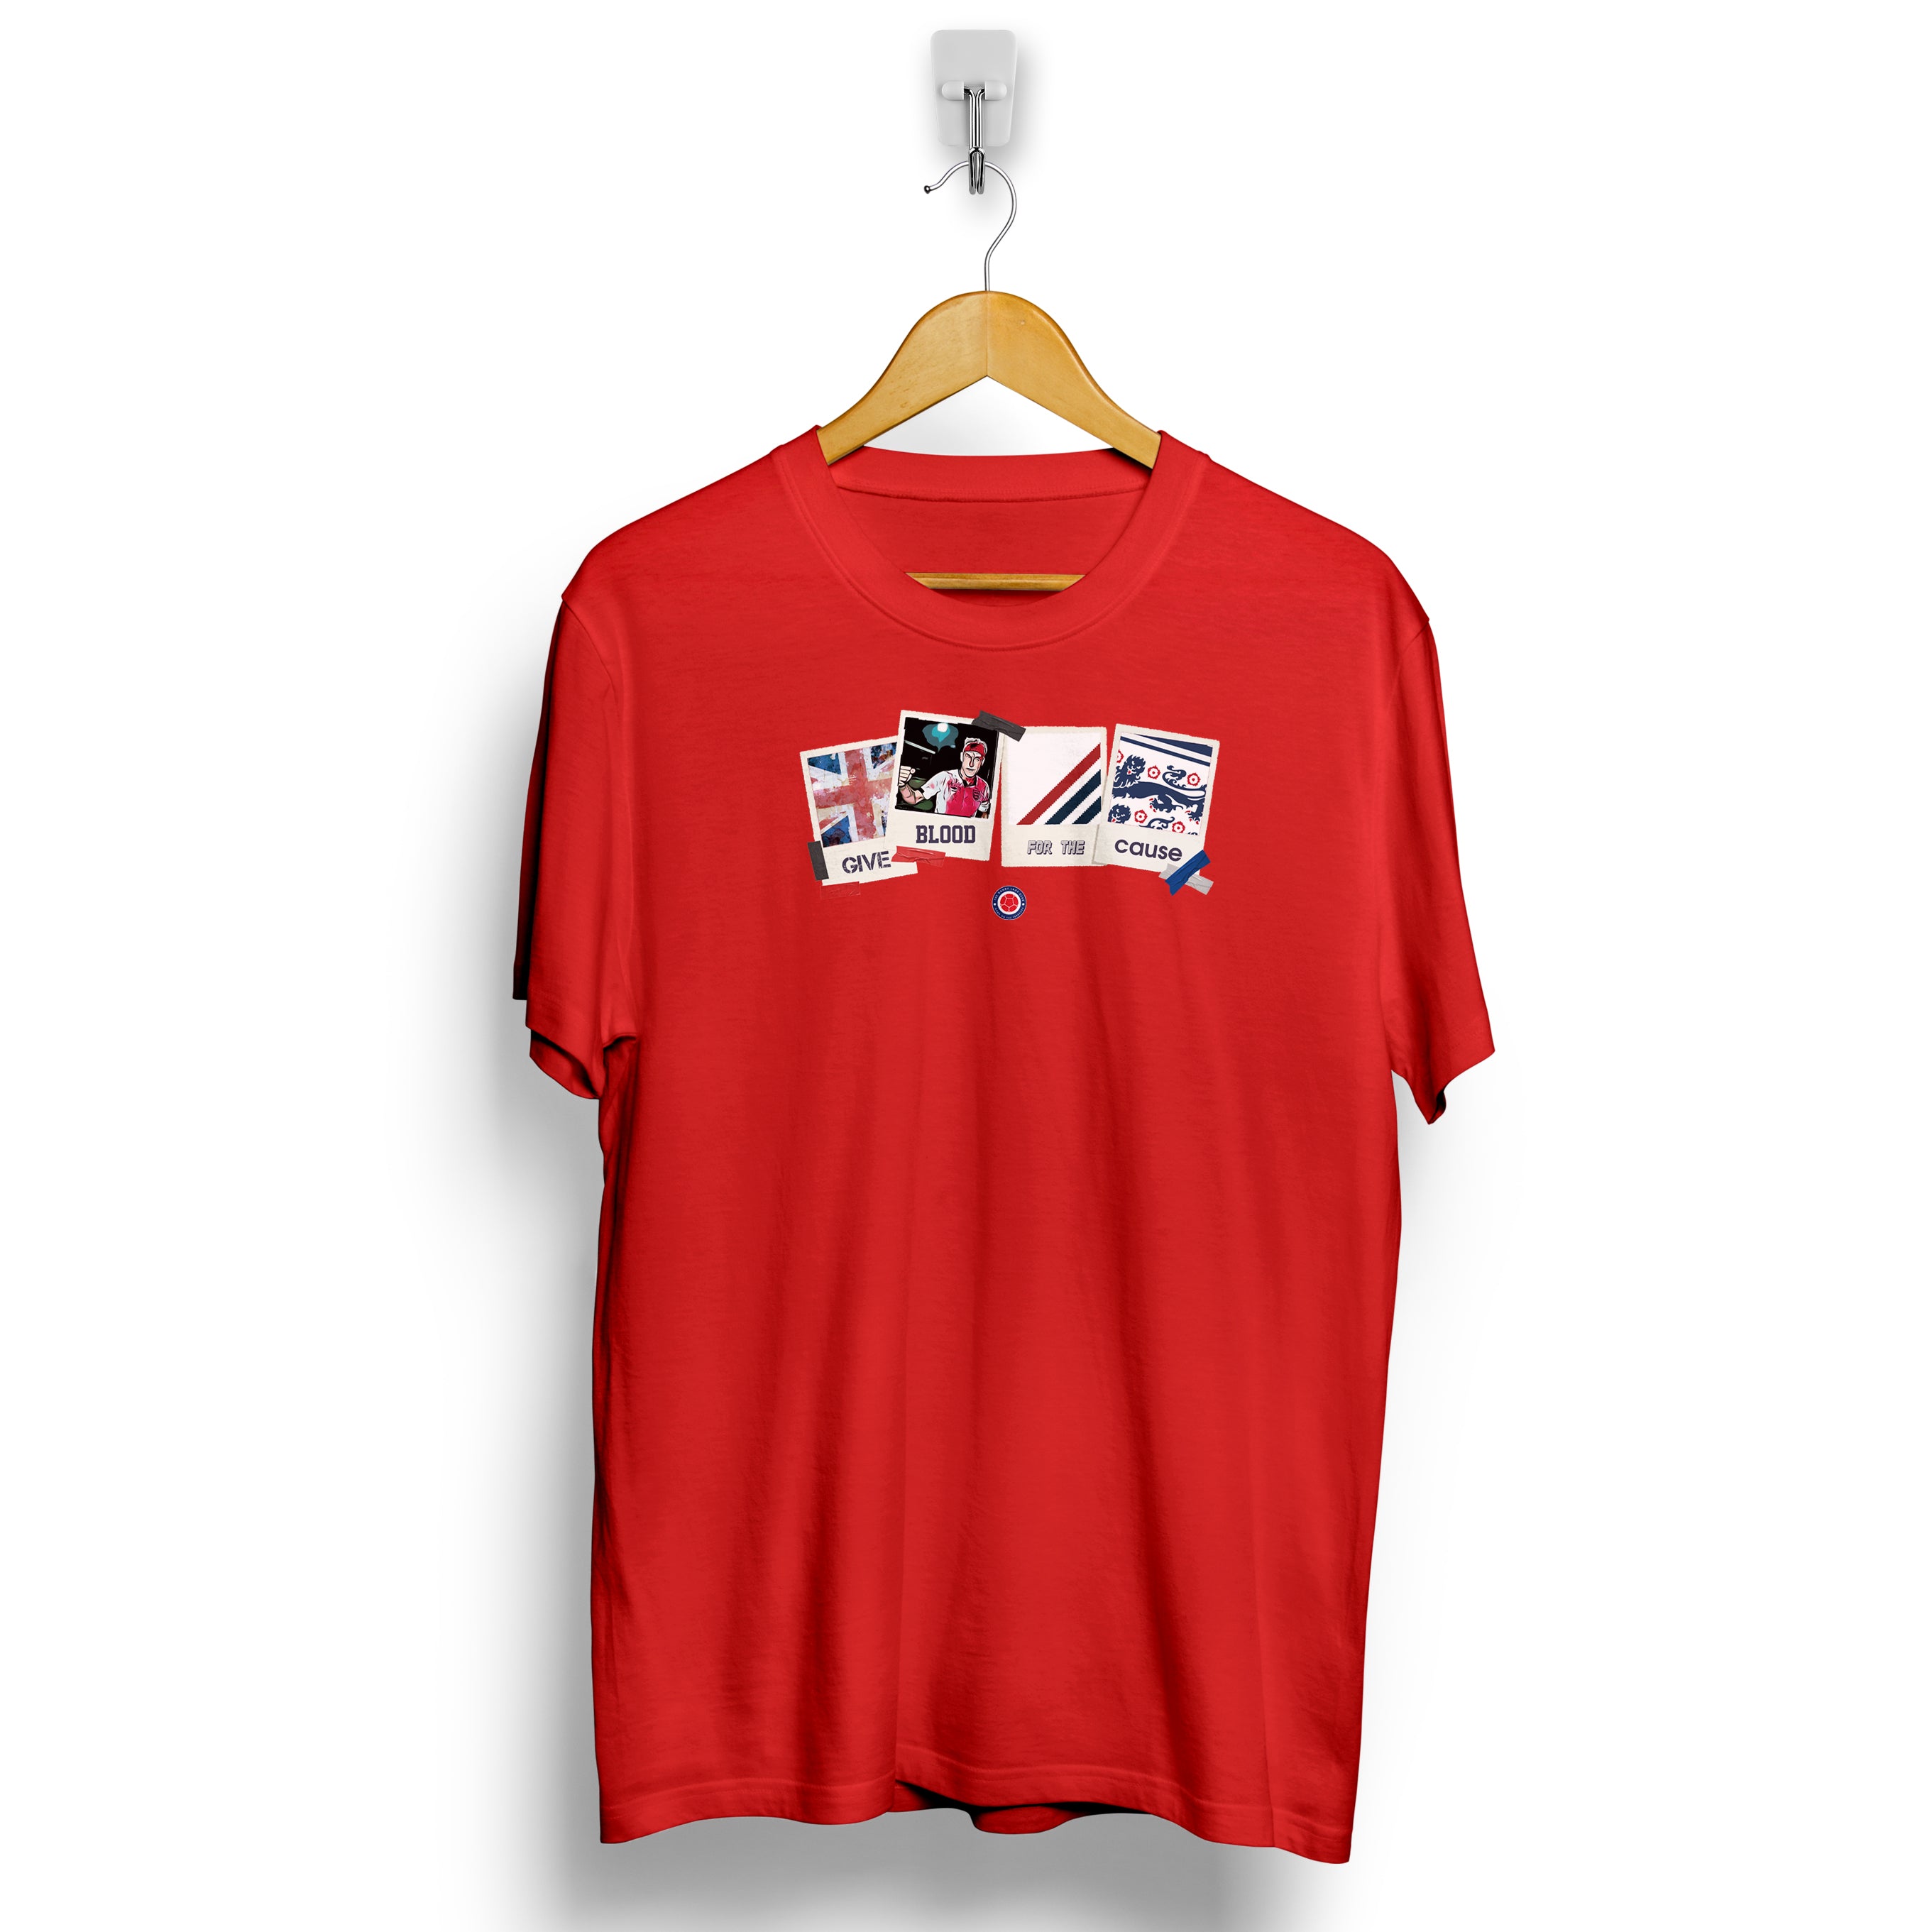 Give Blood For The Cause England Football Casuals Awaydays T Shirt